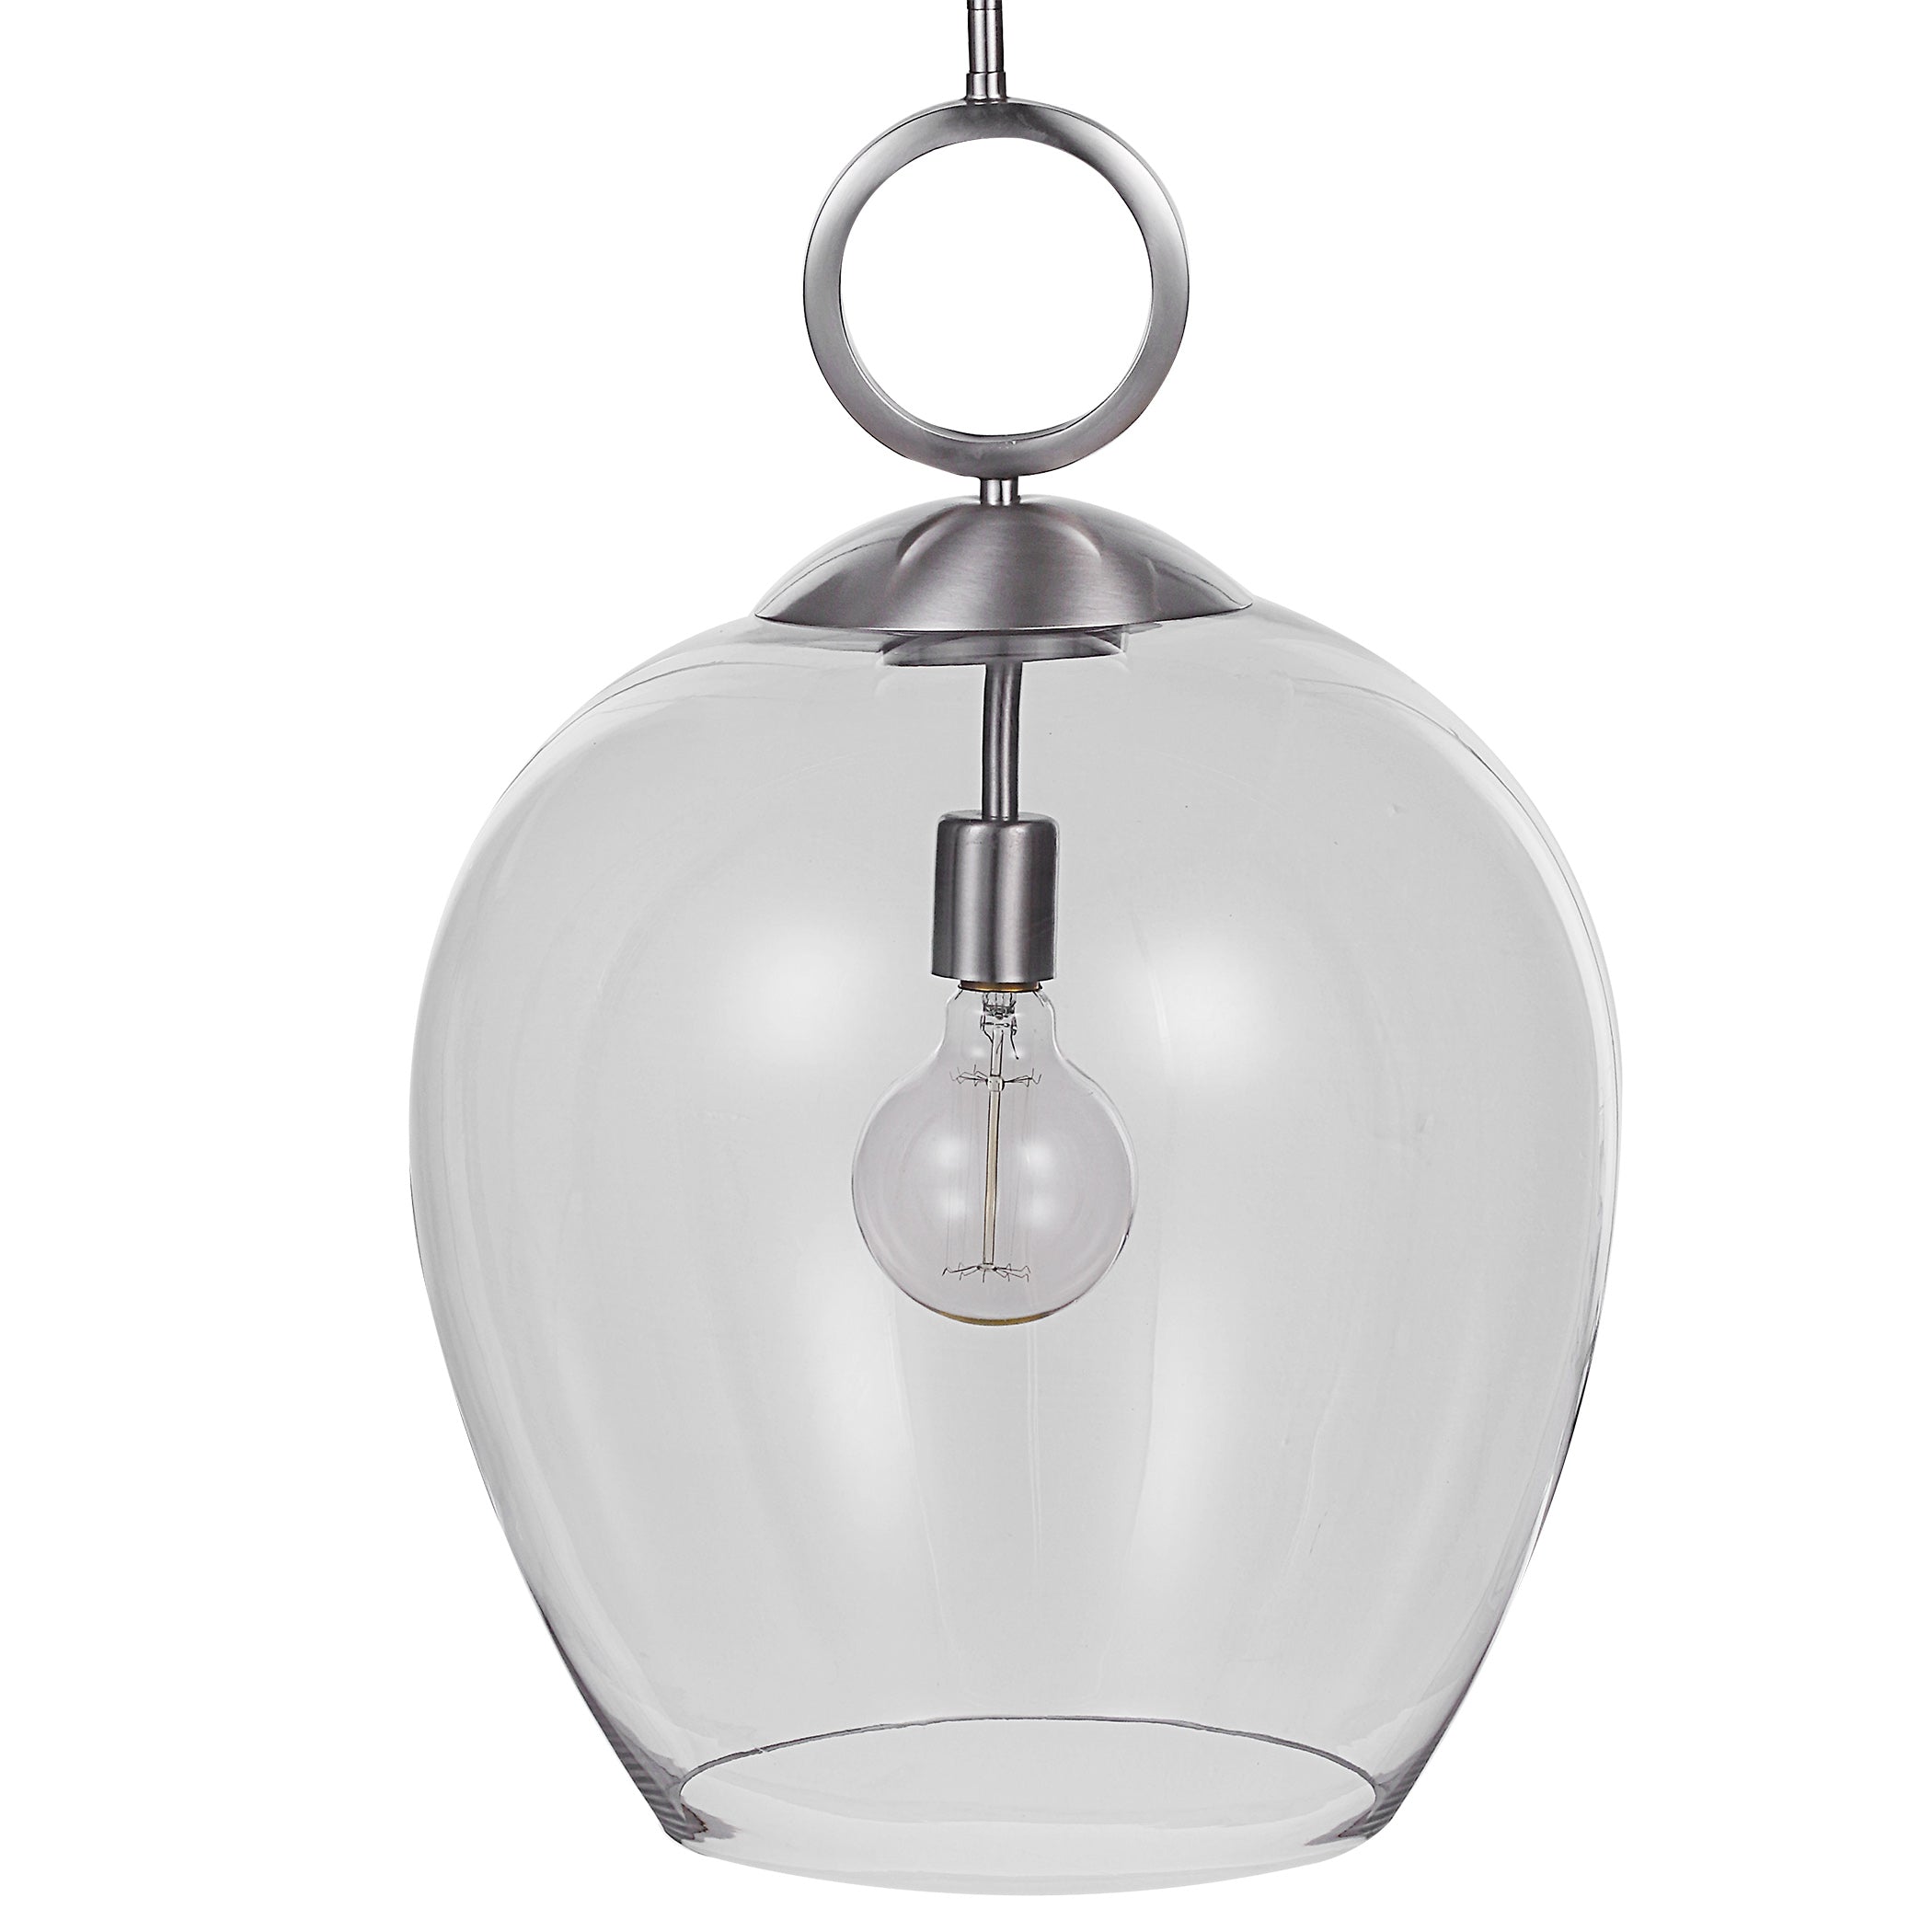 the-official-site-of-official-uttermost-22169-calix-nickel-1-light-glass-pendant-on-sale_4.jpg